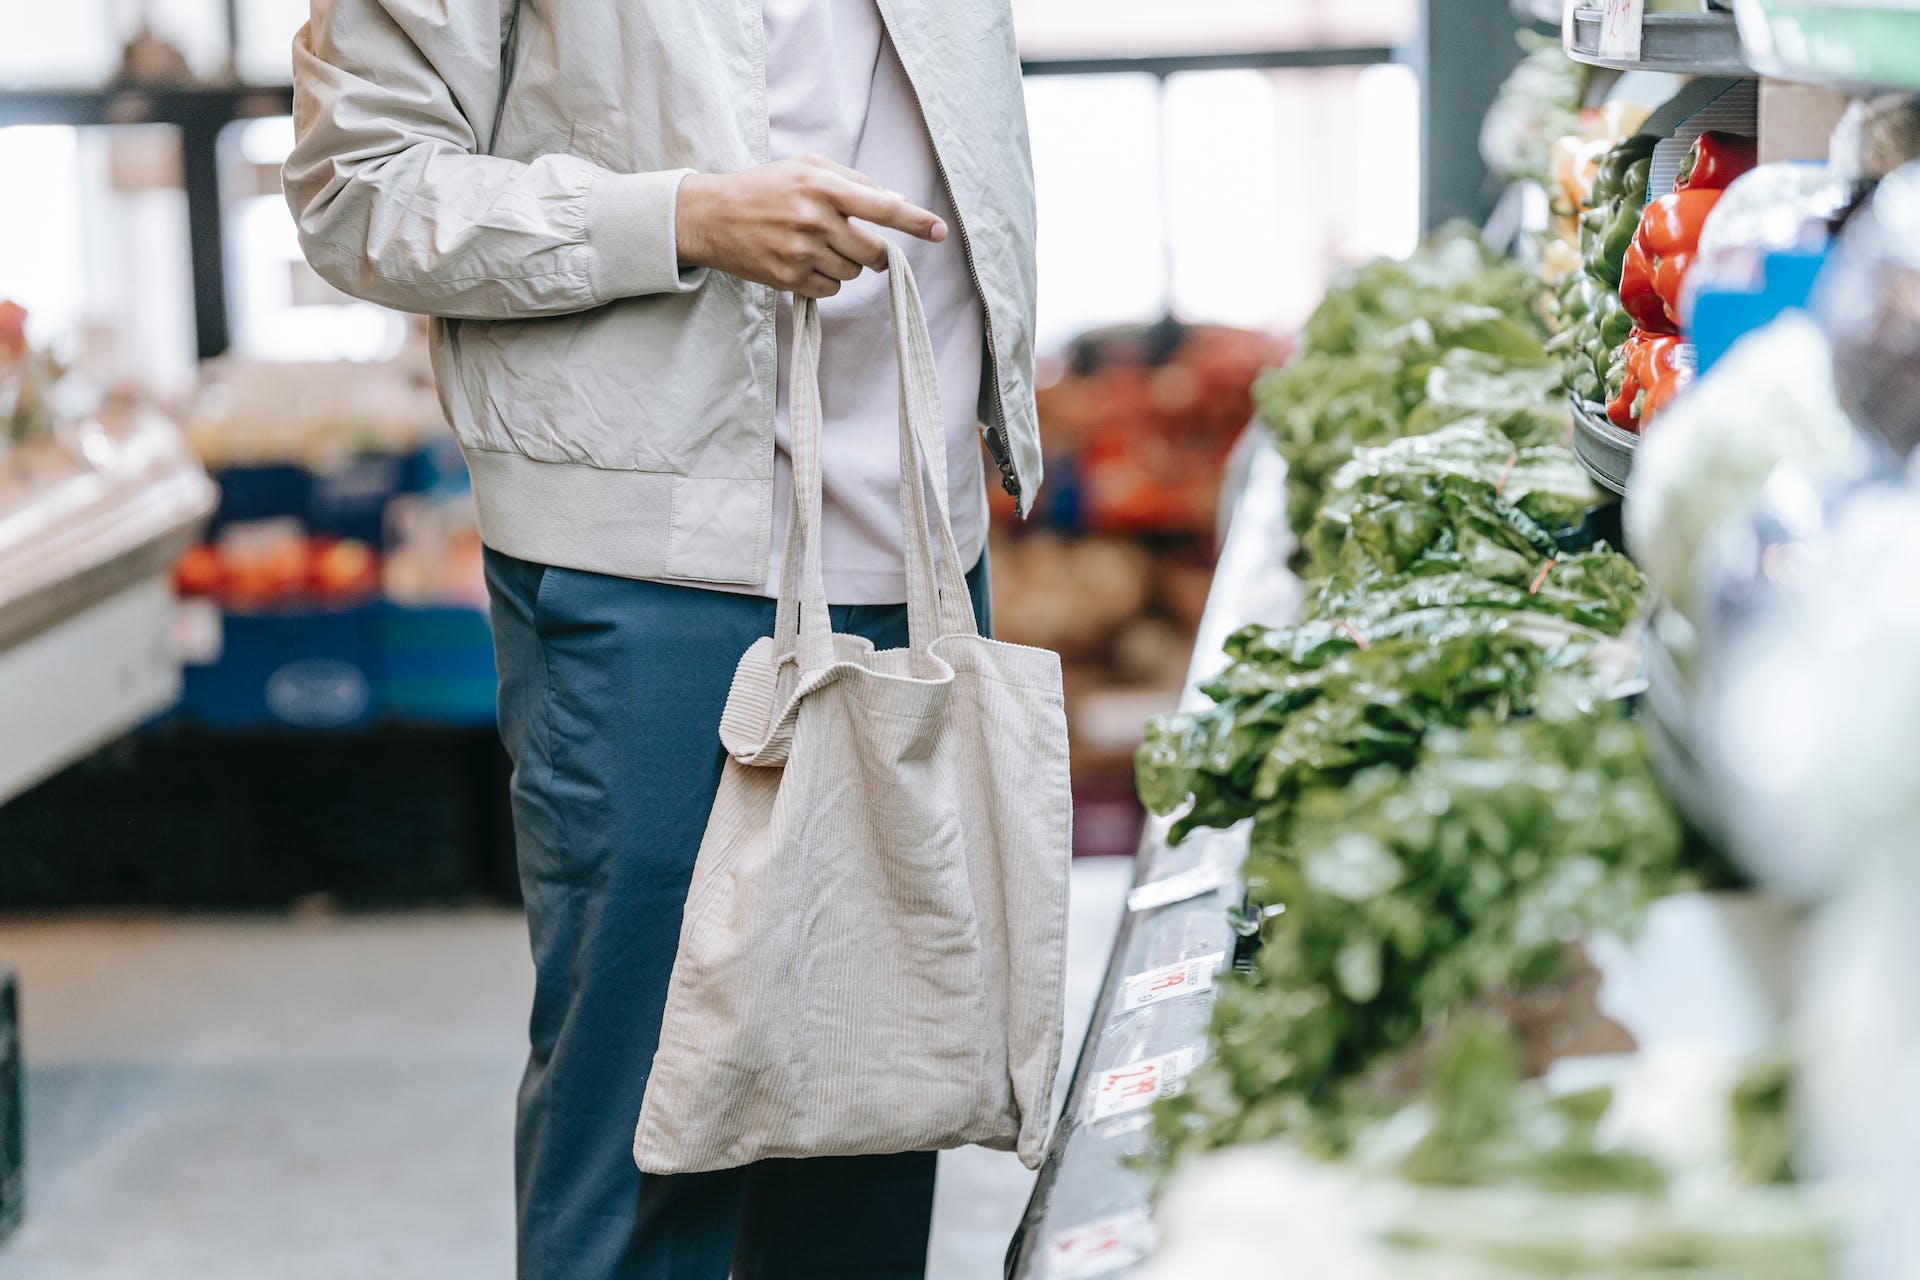 A person standing in a grocery store | Source: Pexels